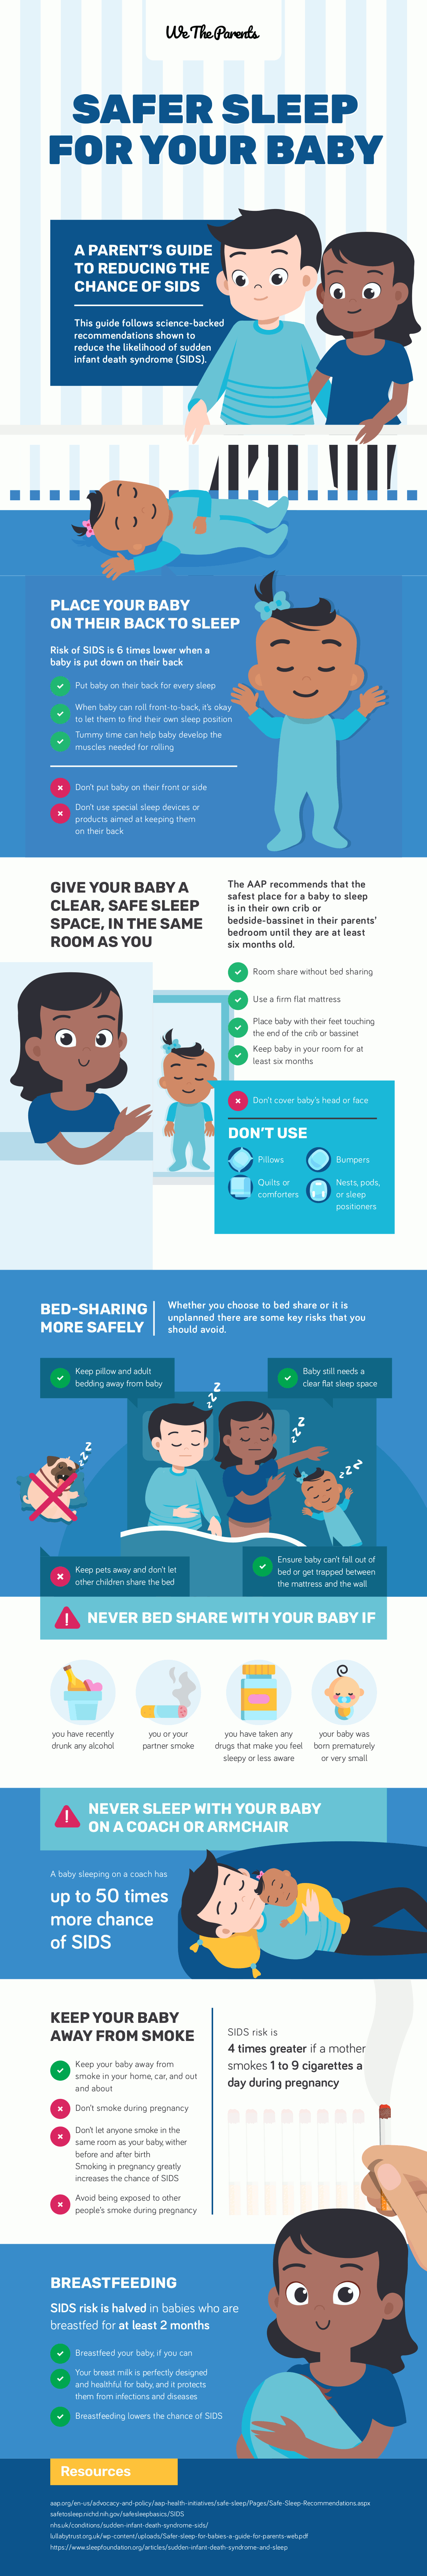 Safety Strategies for Preventing SIDS